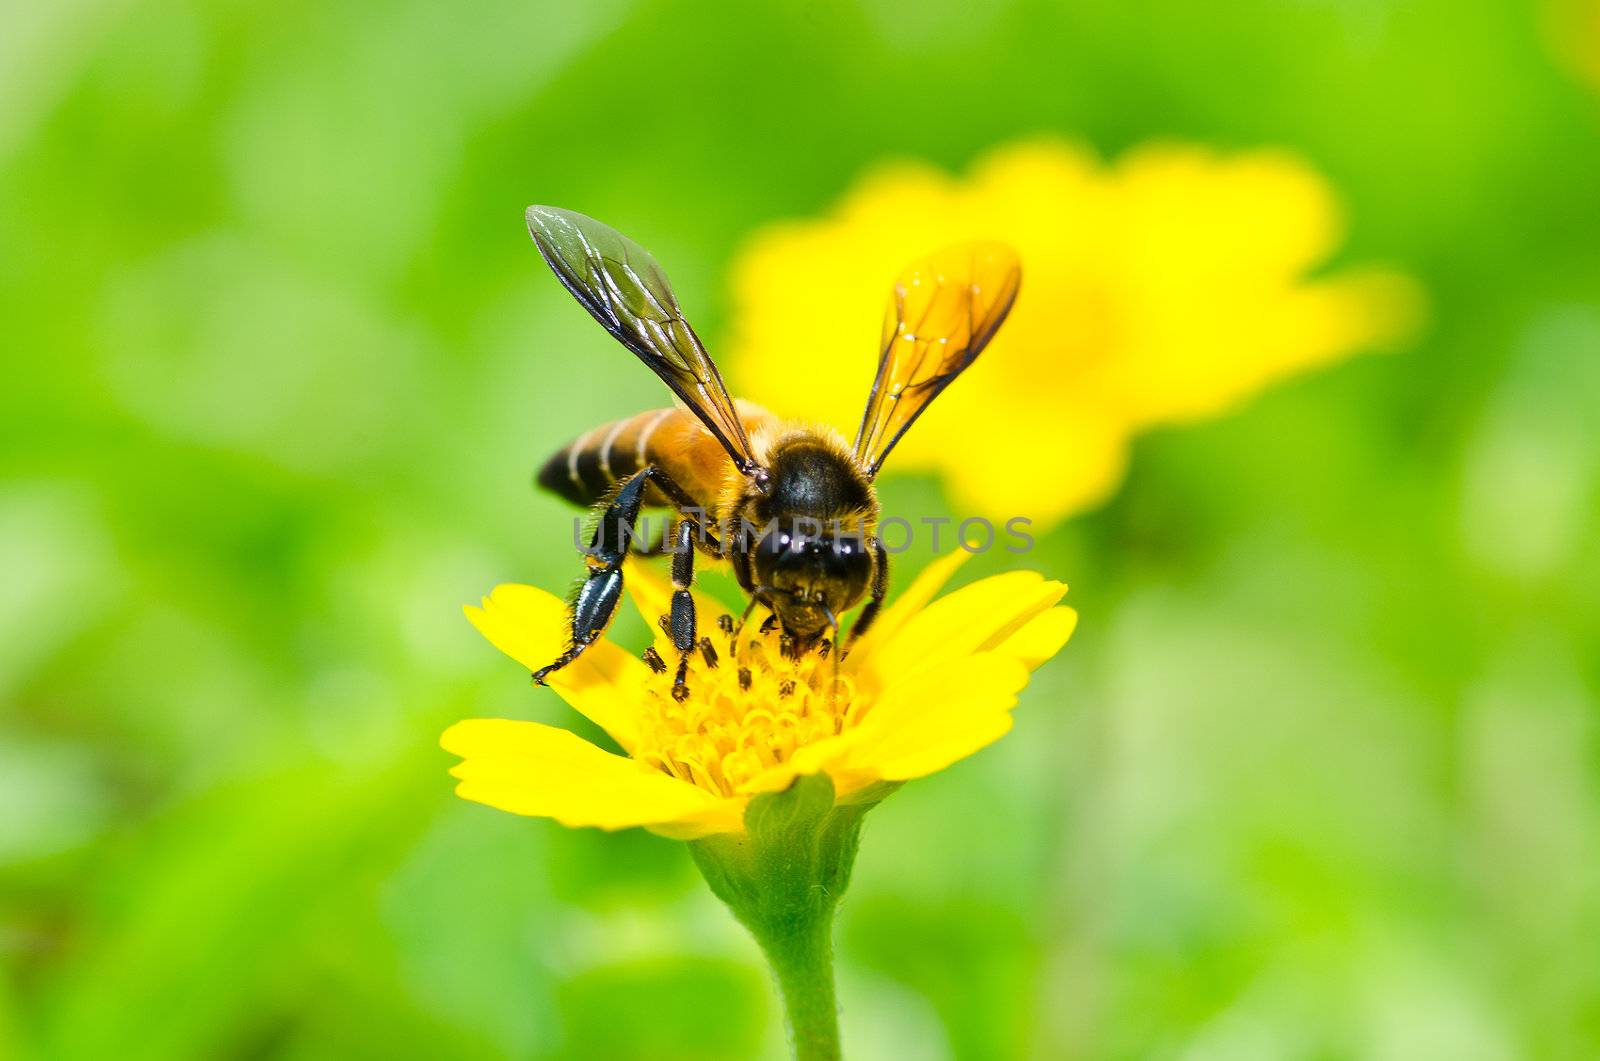 A bee drinking nectar from the flower